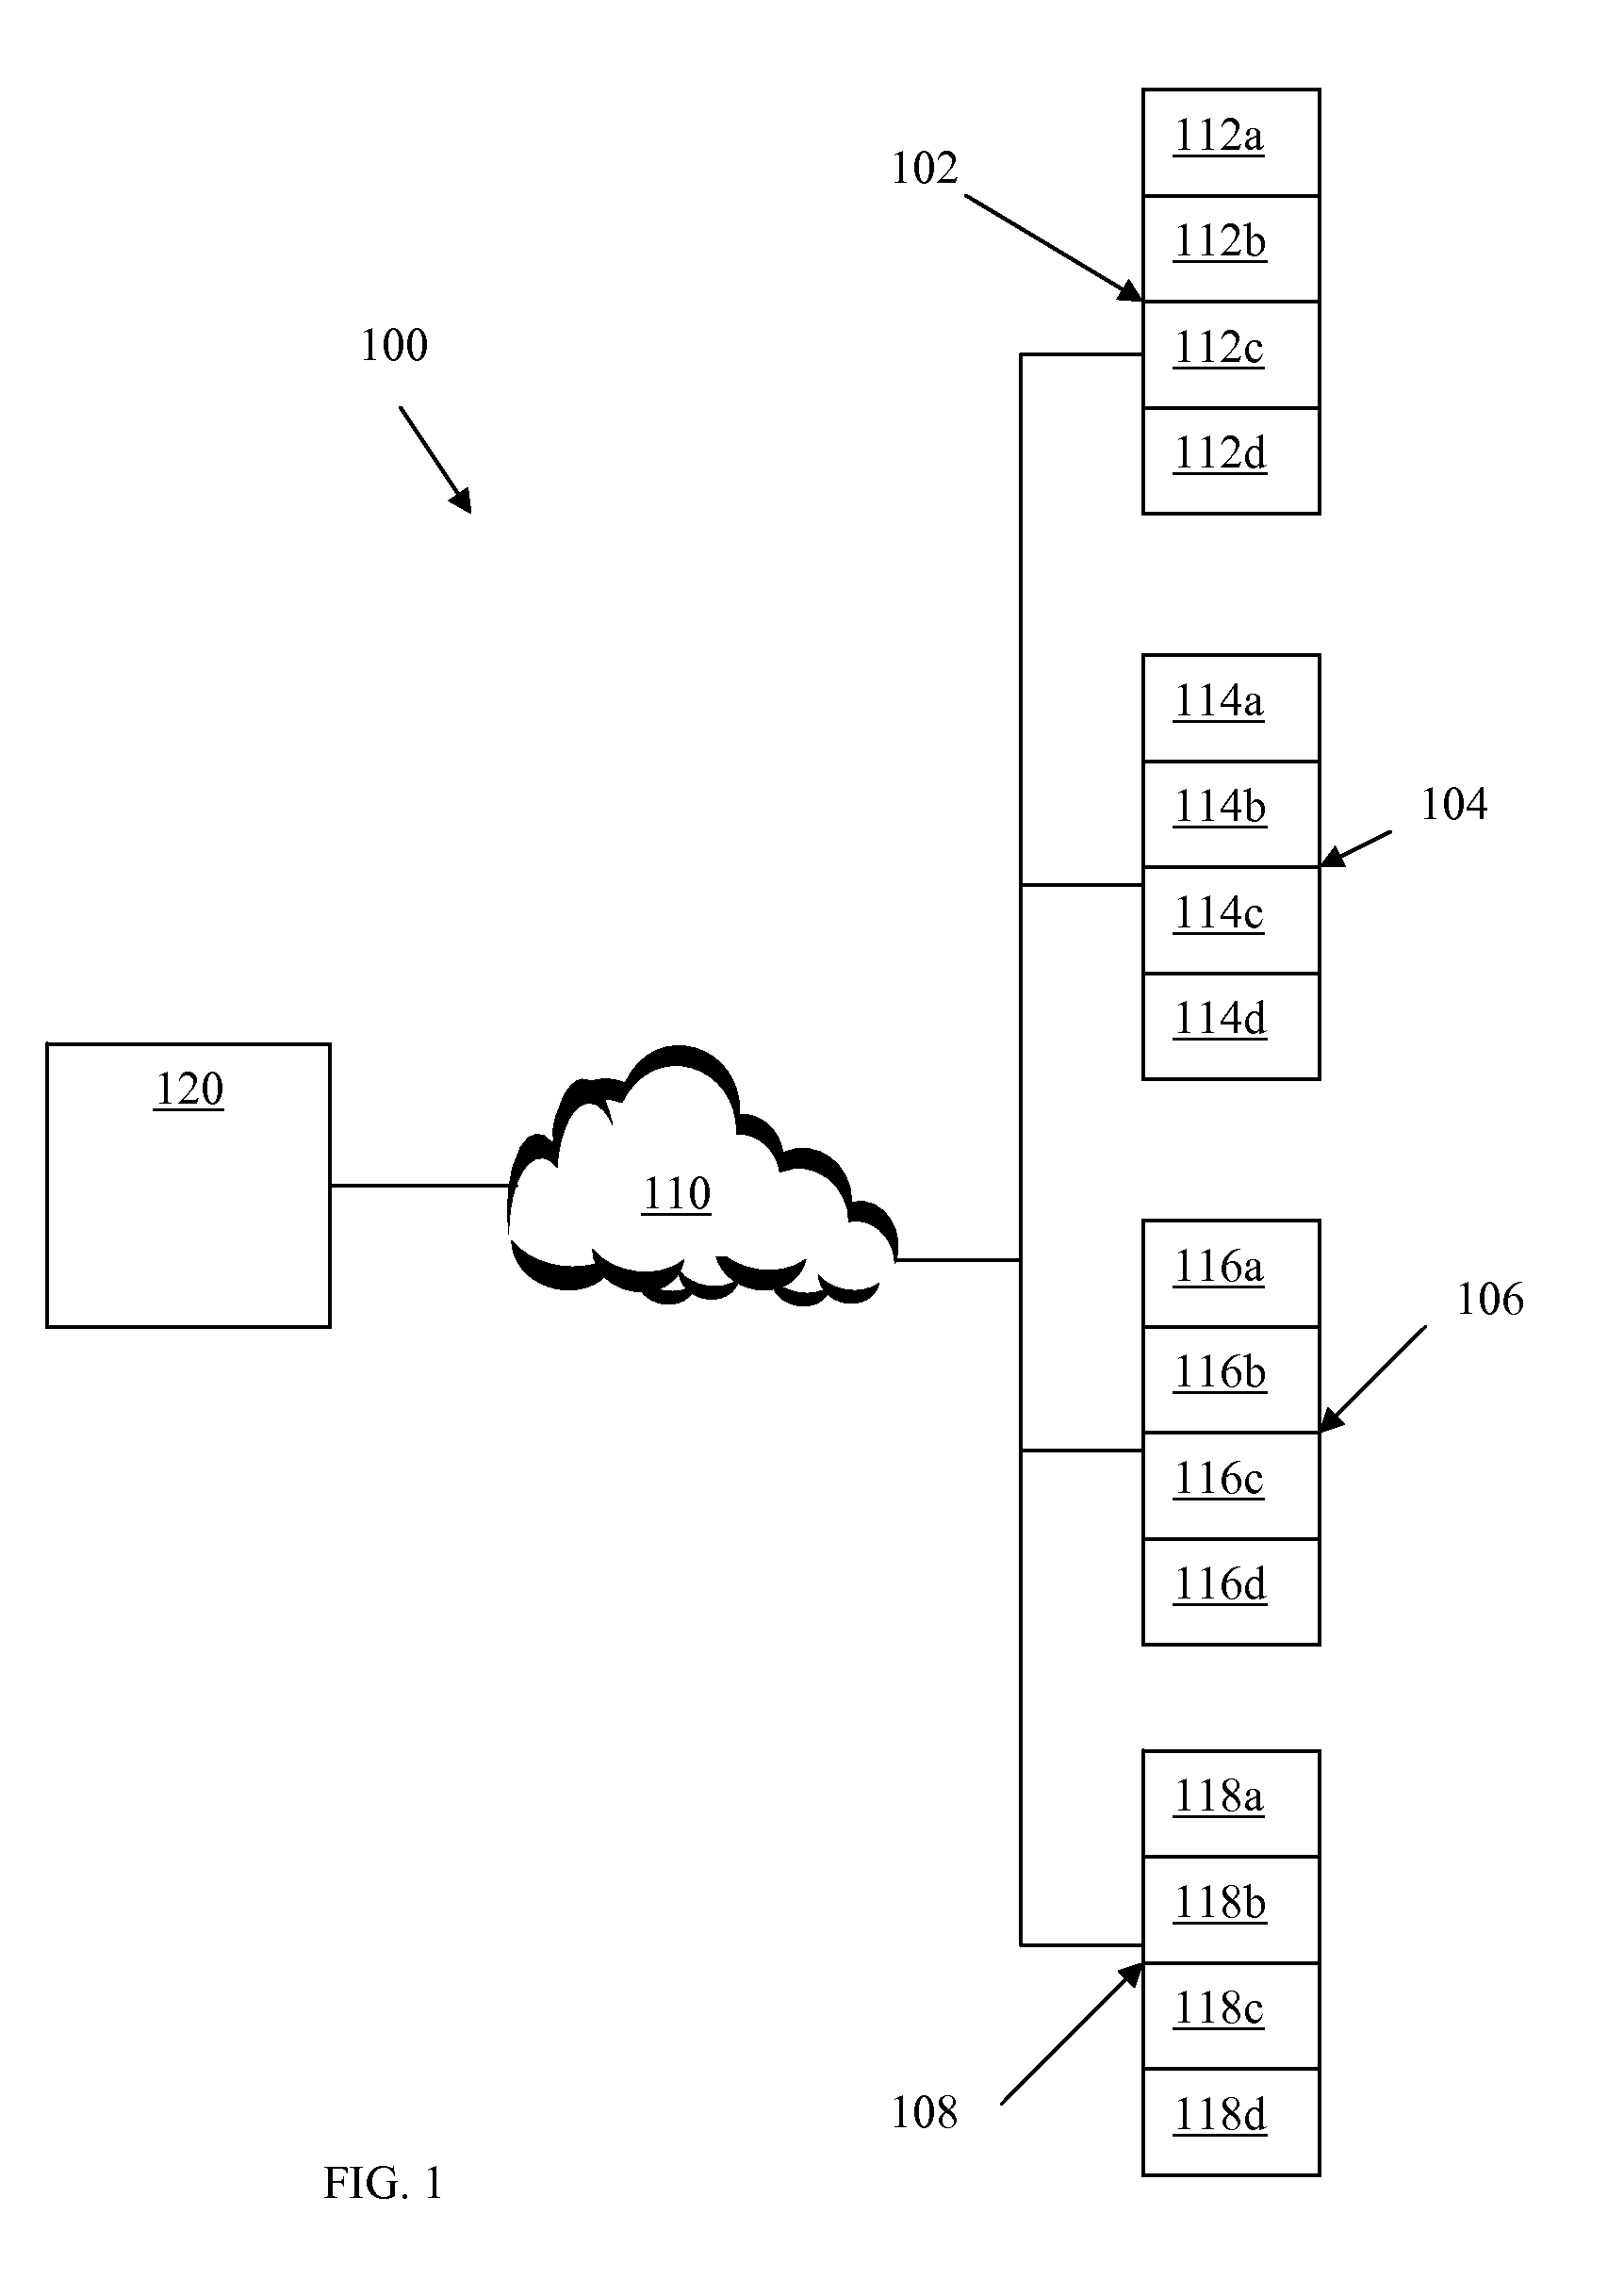 Method and System for a Self Managing and Scalable Grid Storage